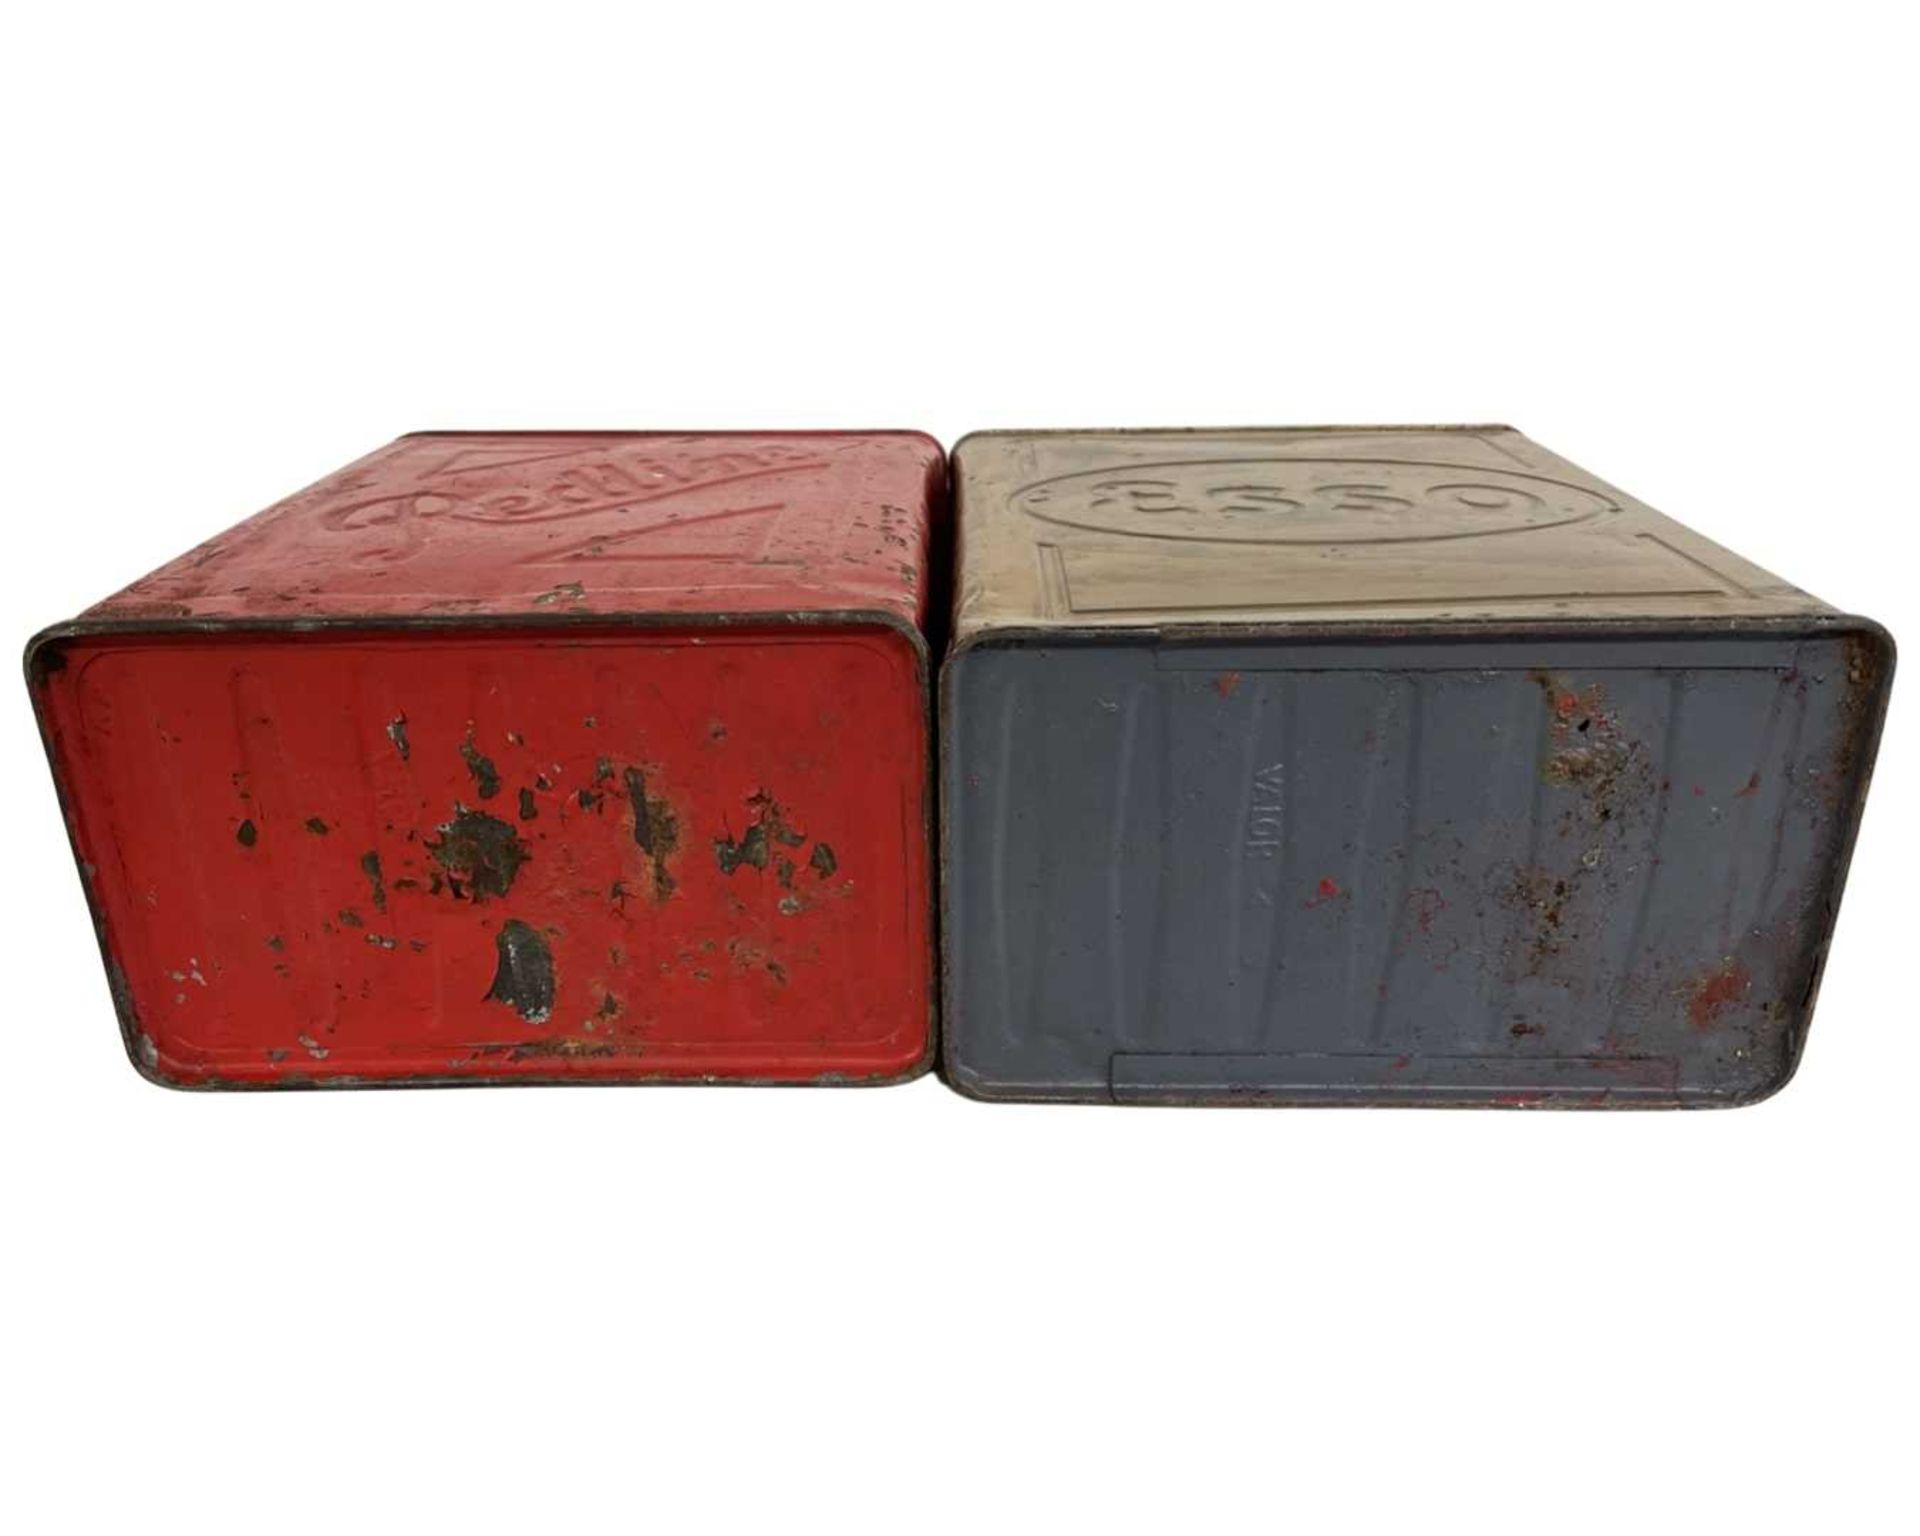 Pair of two gallon petrol cans, Esso and Red Line - Image 3 of 4